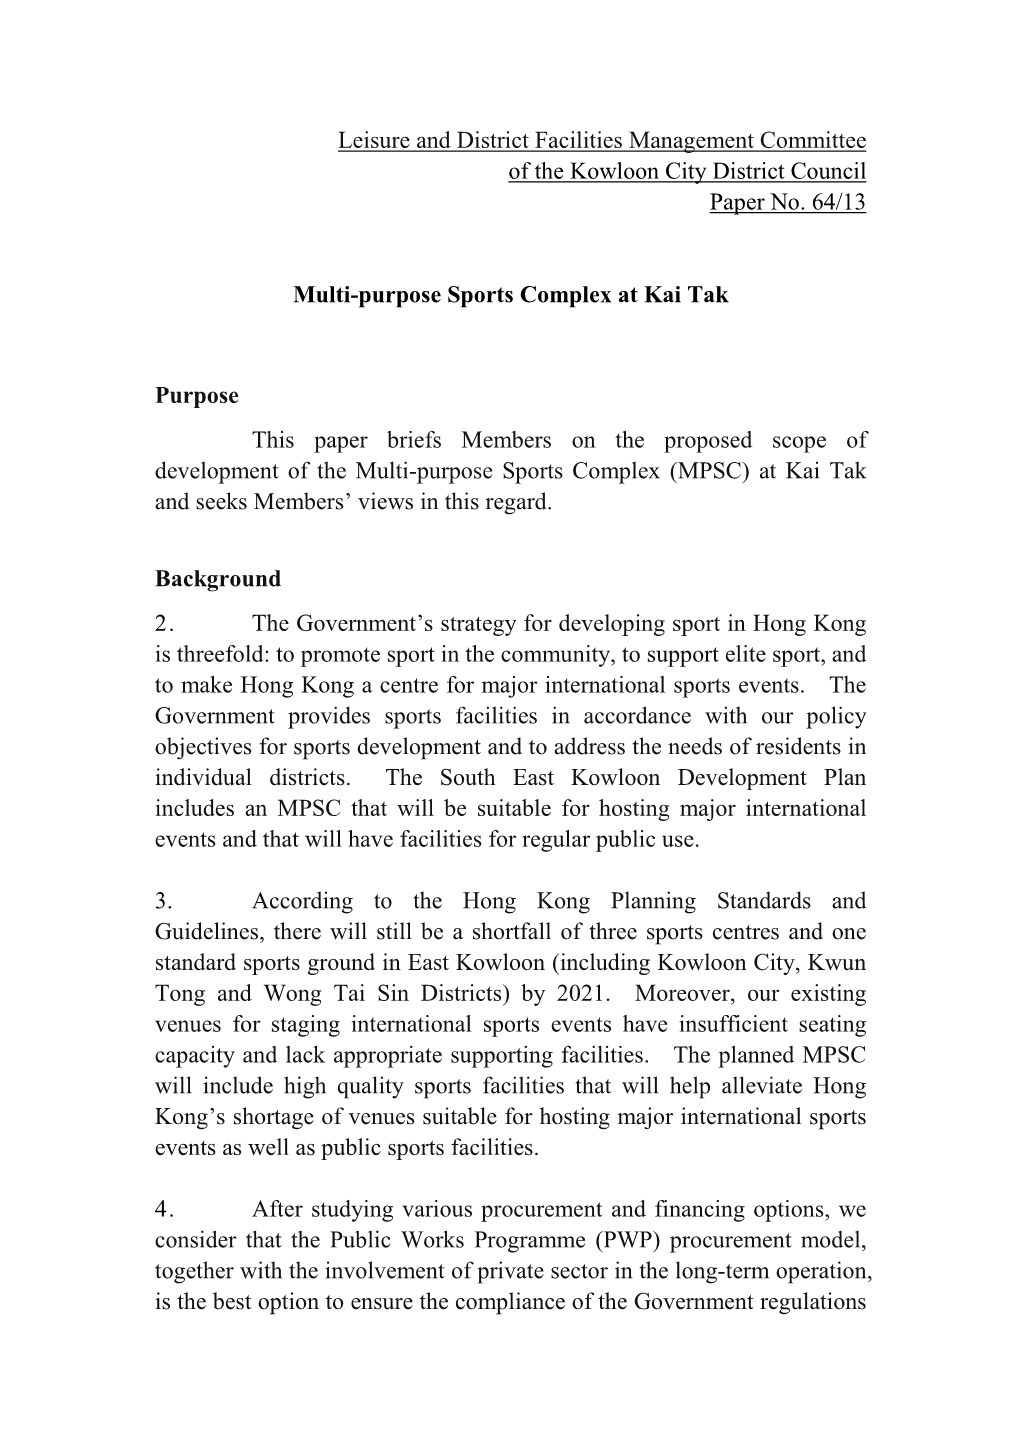 Leisure and District Facilities Management Committee of the Kowloon City District Council Paper No